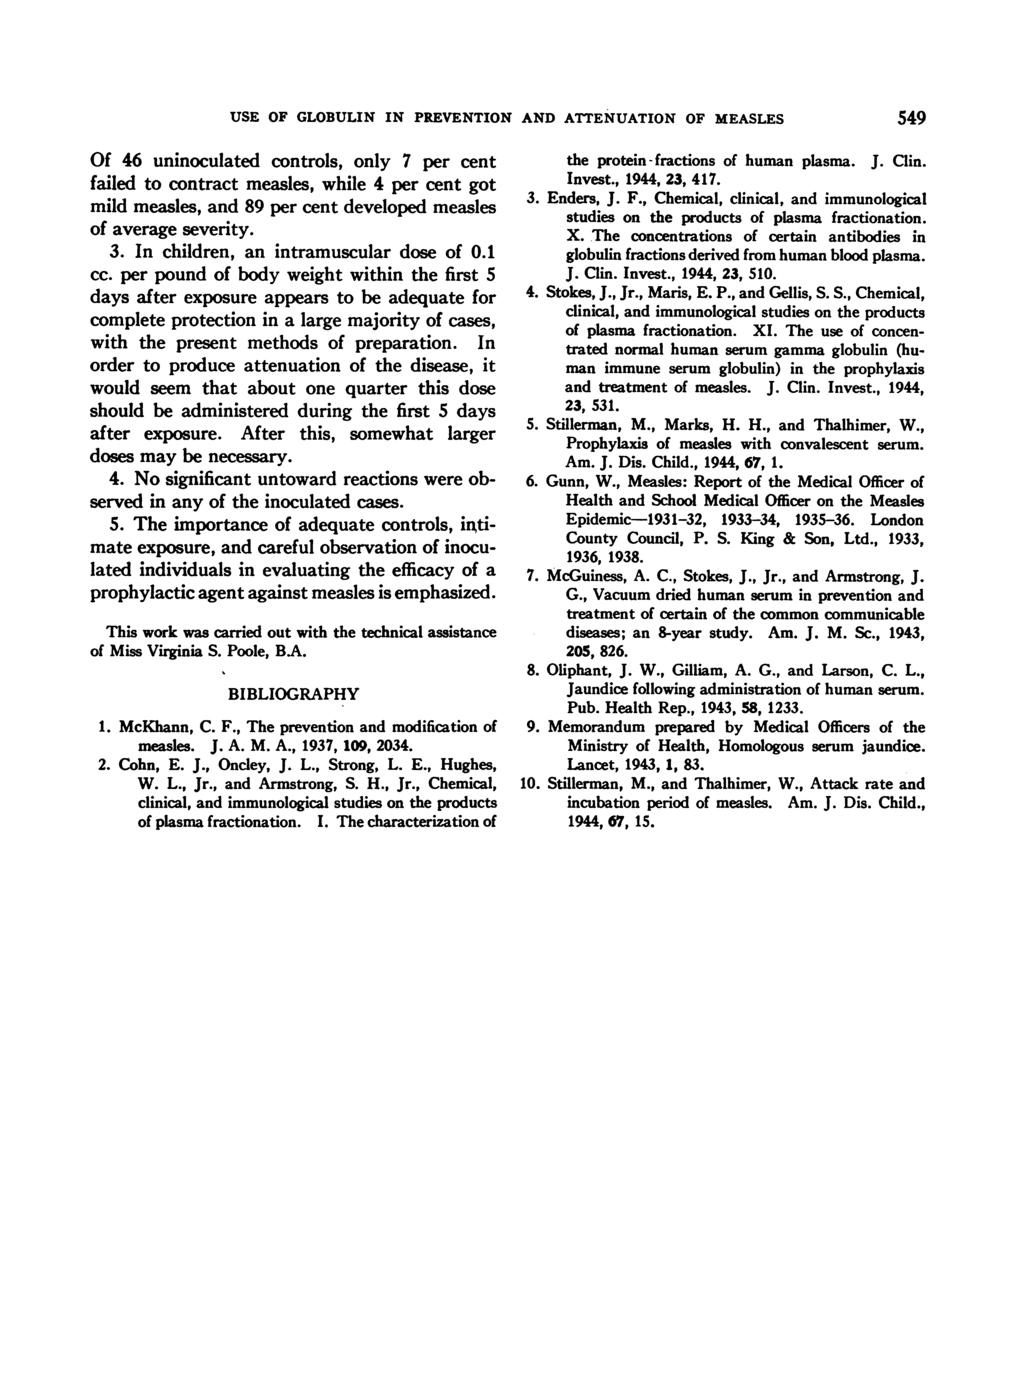 USE OF GLOBULIN IN PREVENTION AND ATTENUATION OF MEASLES Of 46 uninoculted controls, only 7 per cent filed to contrct mesles, while 4 per cent got mild mesles, nd 89 per cent developed mesles of